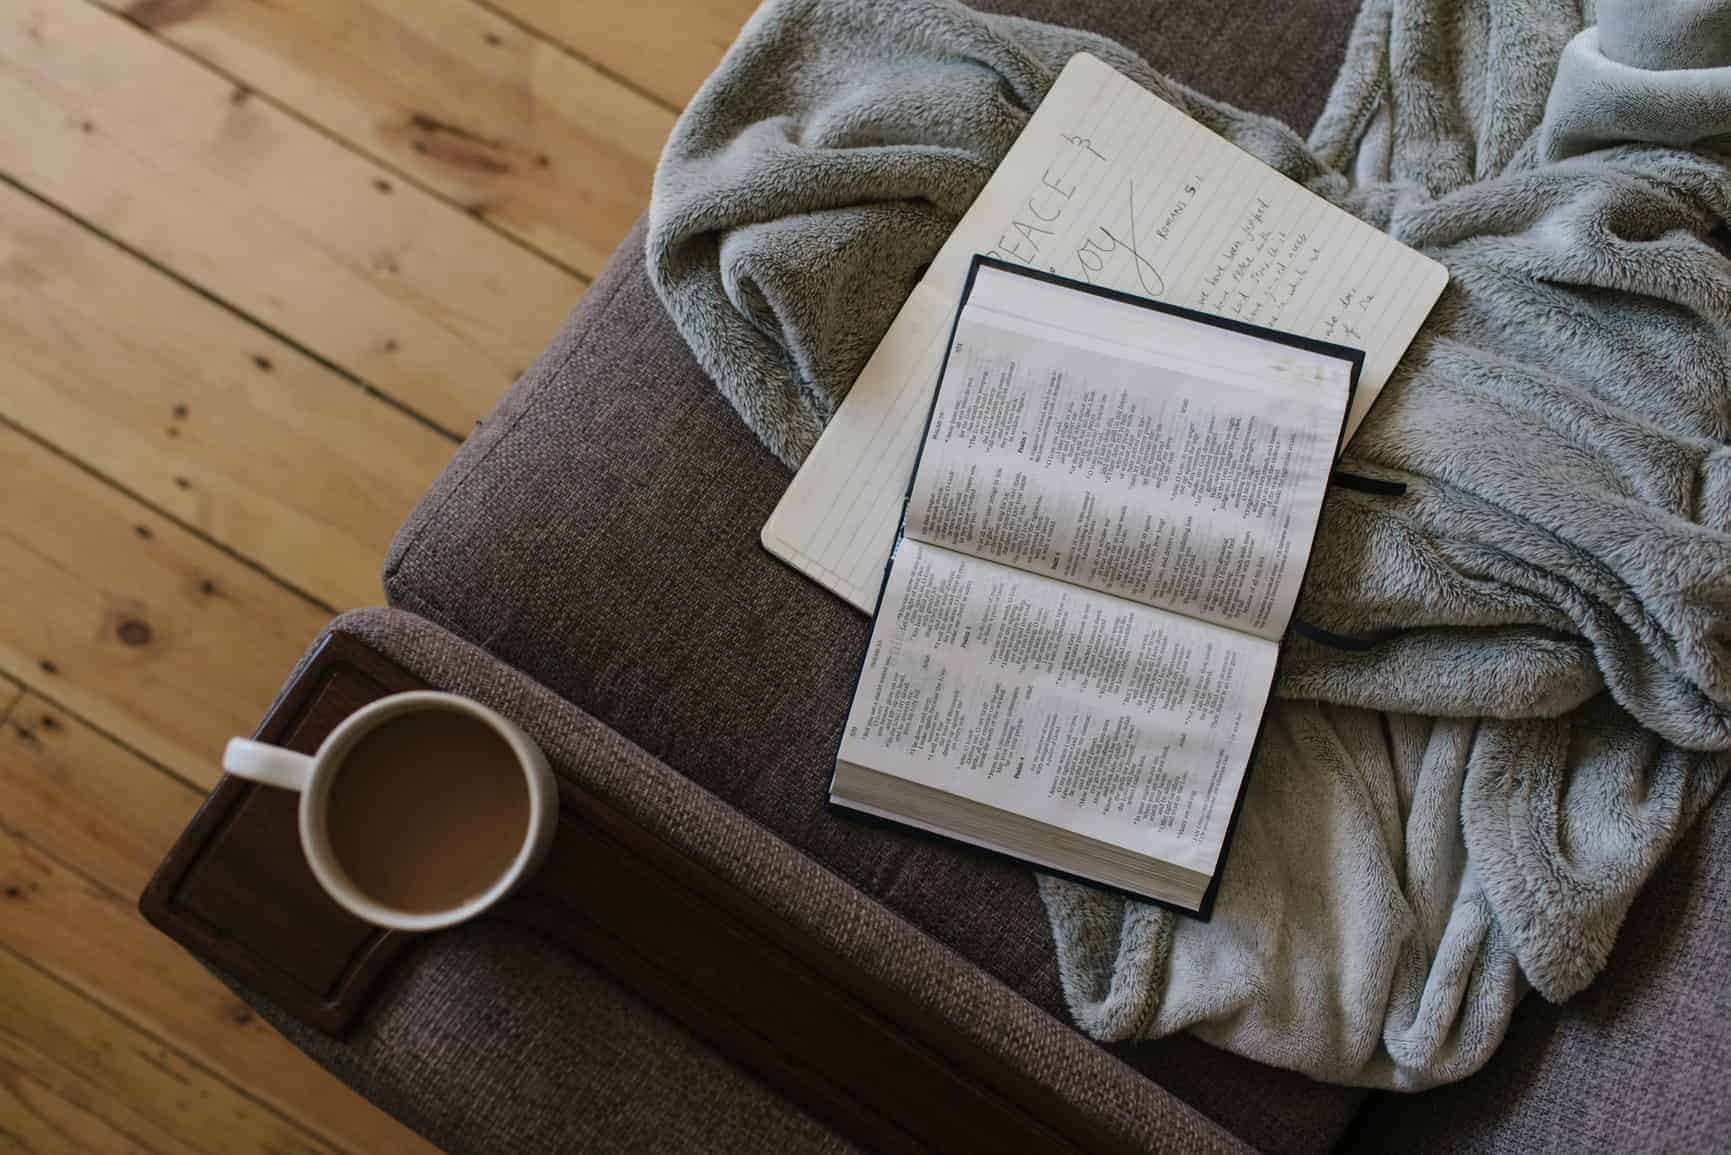 A Bible and some coffee laid out on a couch